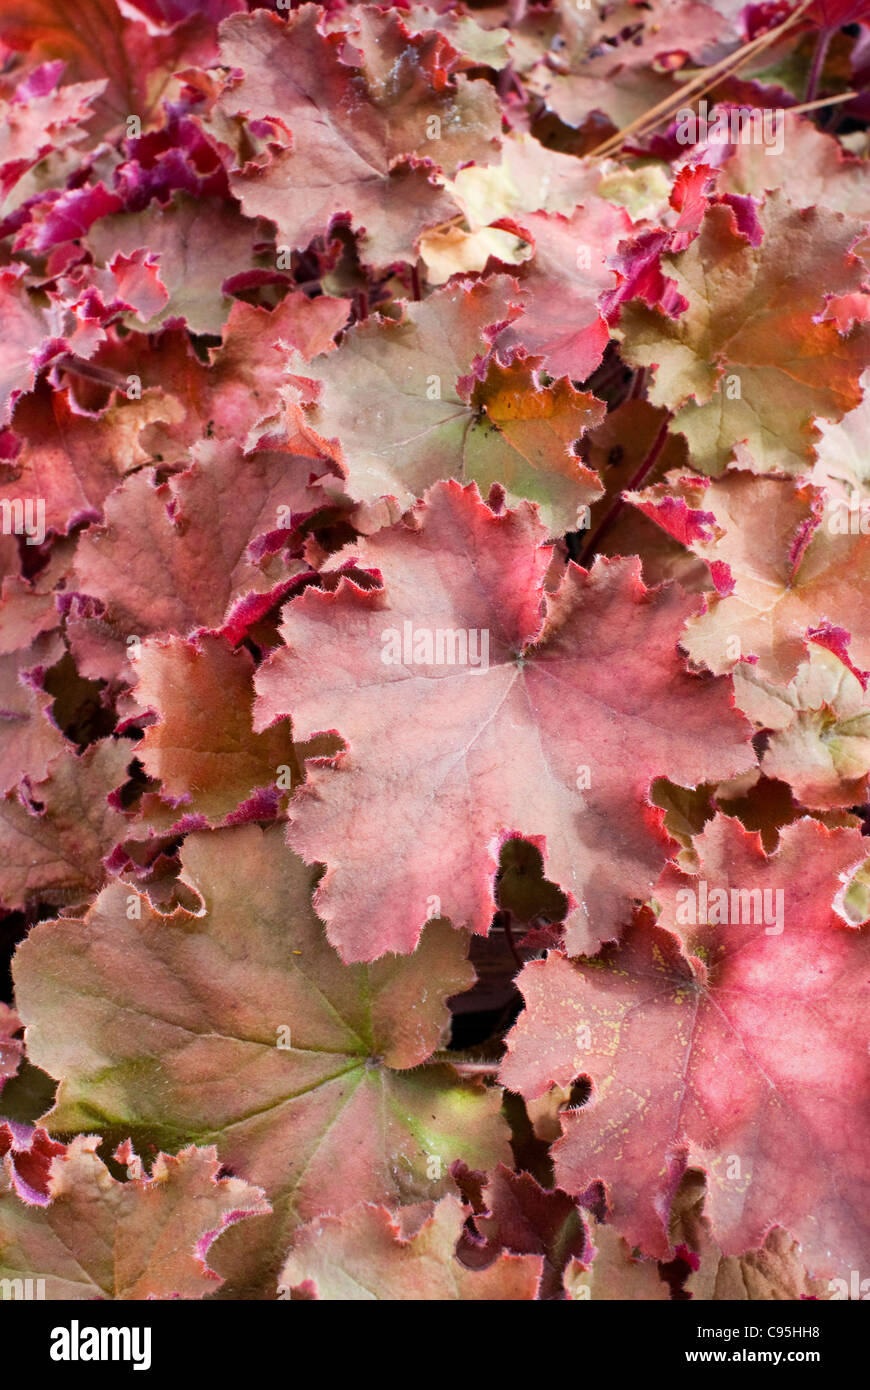 Heuchera 'Kassandra' in fall autumn leaves, colorful foliage perennial plant scalloped red orange leaf colors for shade garden Stock Photo